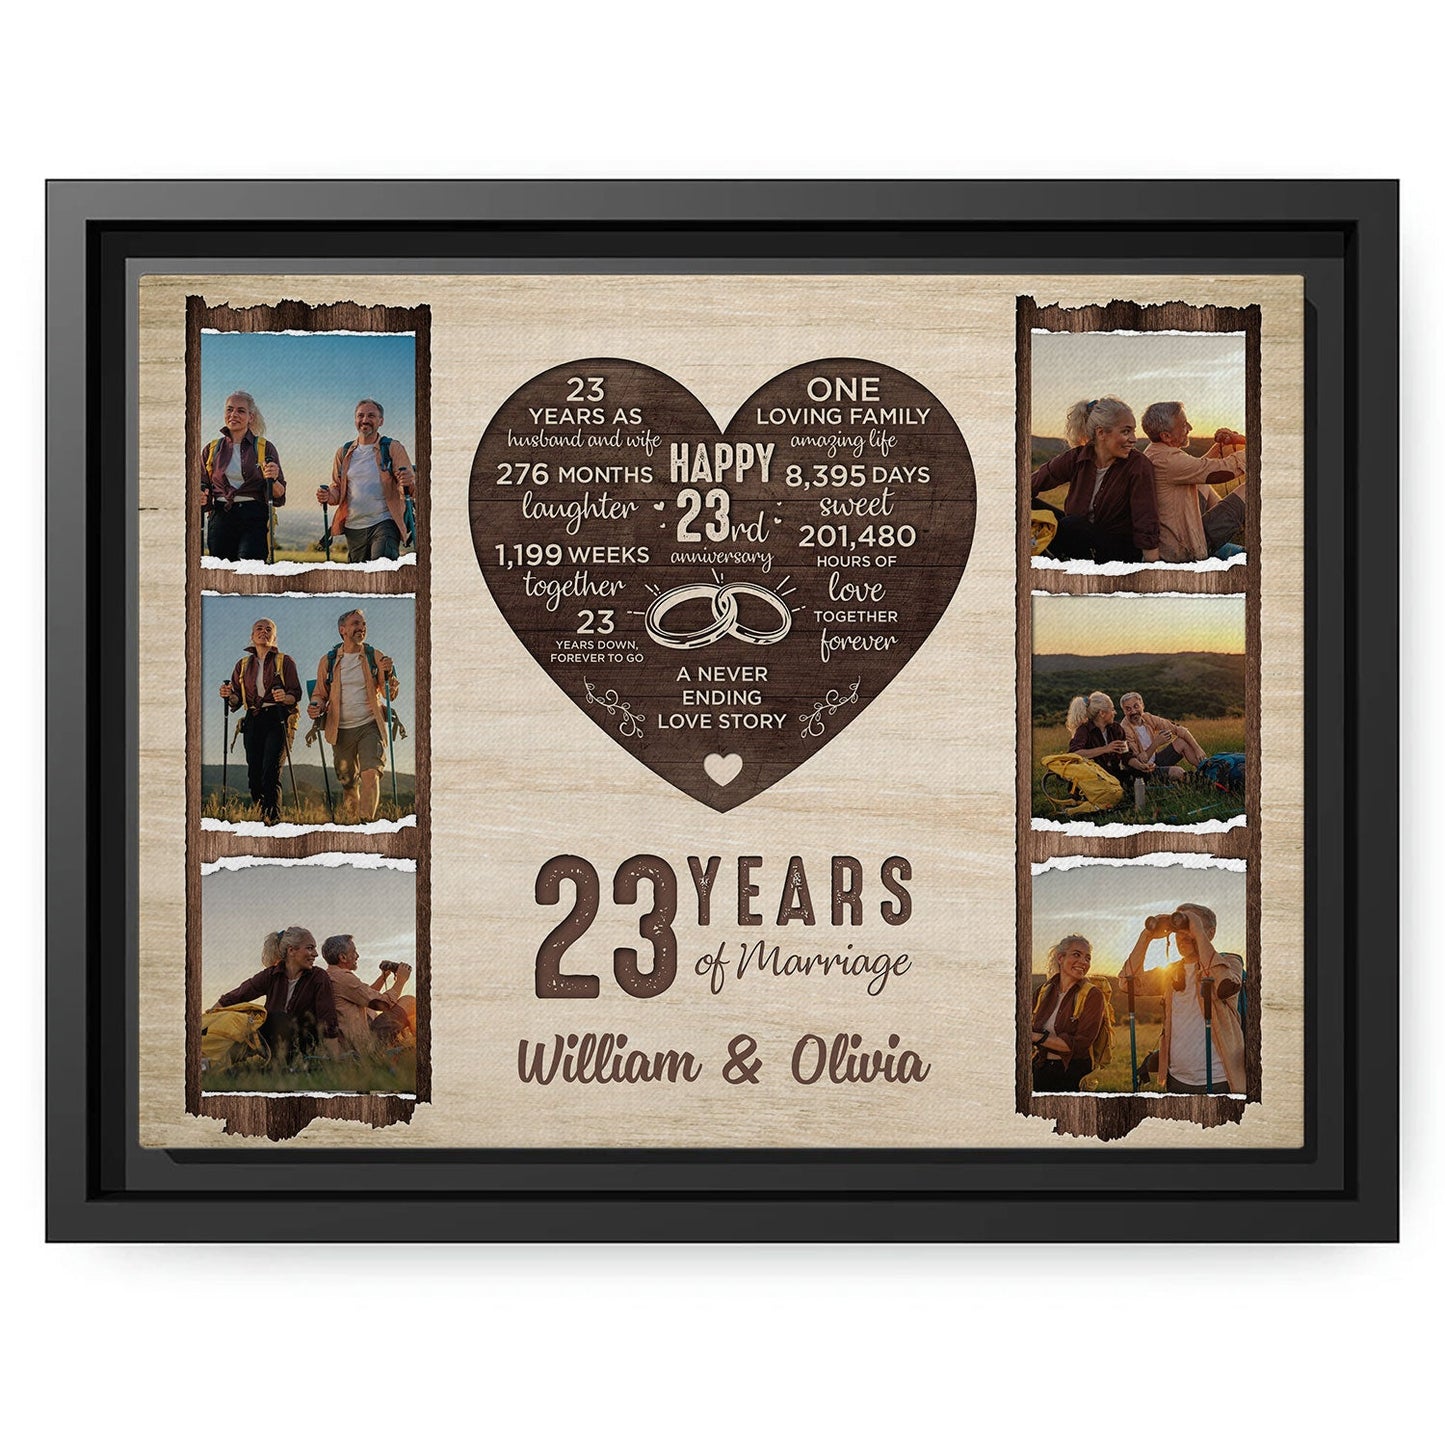 23 Years Of Marriage - Personalized 23 Year Anniversary gift For Parents - Custom Canvas Print - MyMindfulGifts